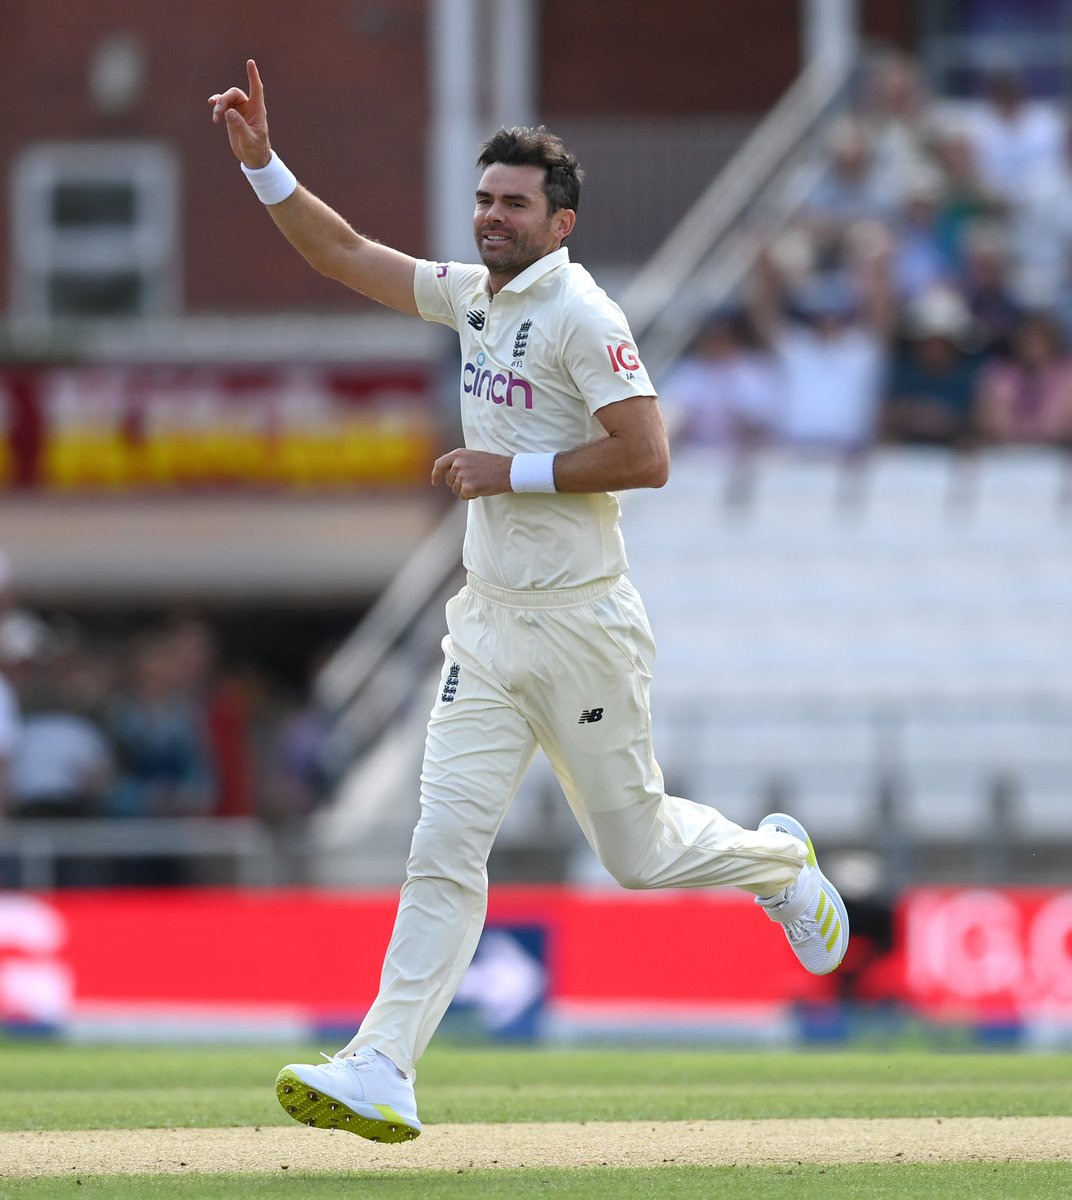 Cric World 🌍 #JamesAnderson has announced that he will retire from international cricket after England's first Test of the summer at Lord's, against West Indies, starting 10th July! 📢 #CricketTwitter #England @jimmy9 ⭐ 7️⃣0️⃣0️⃣*